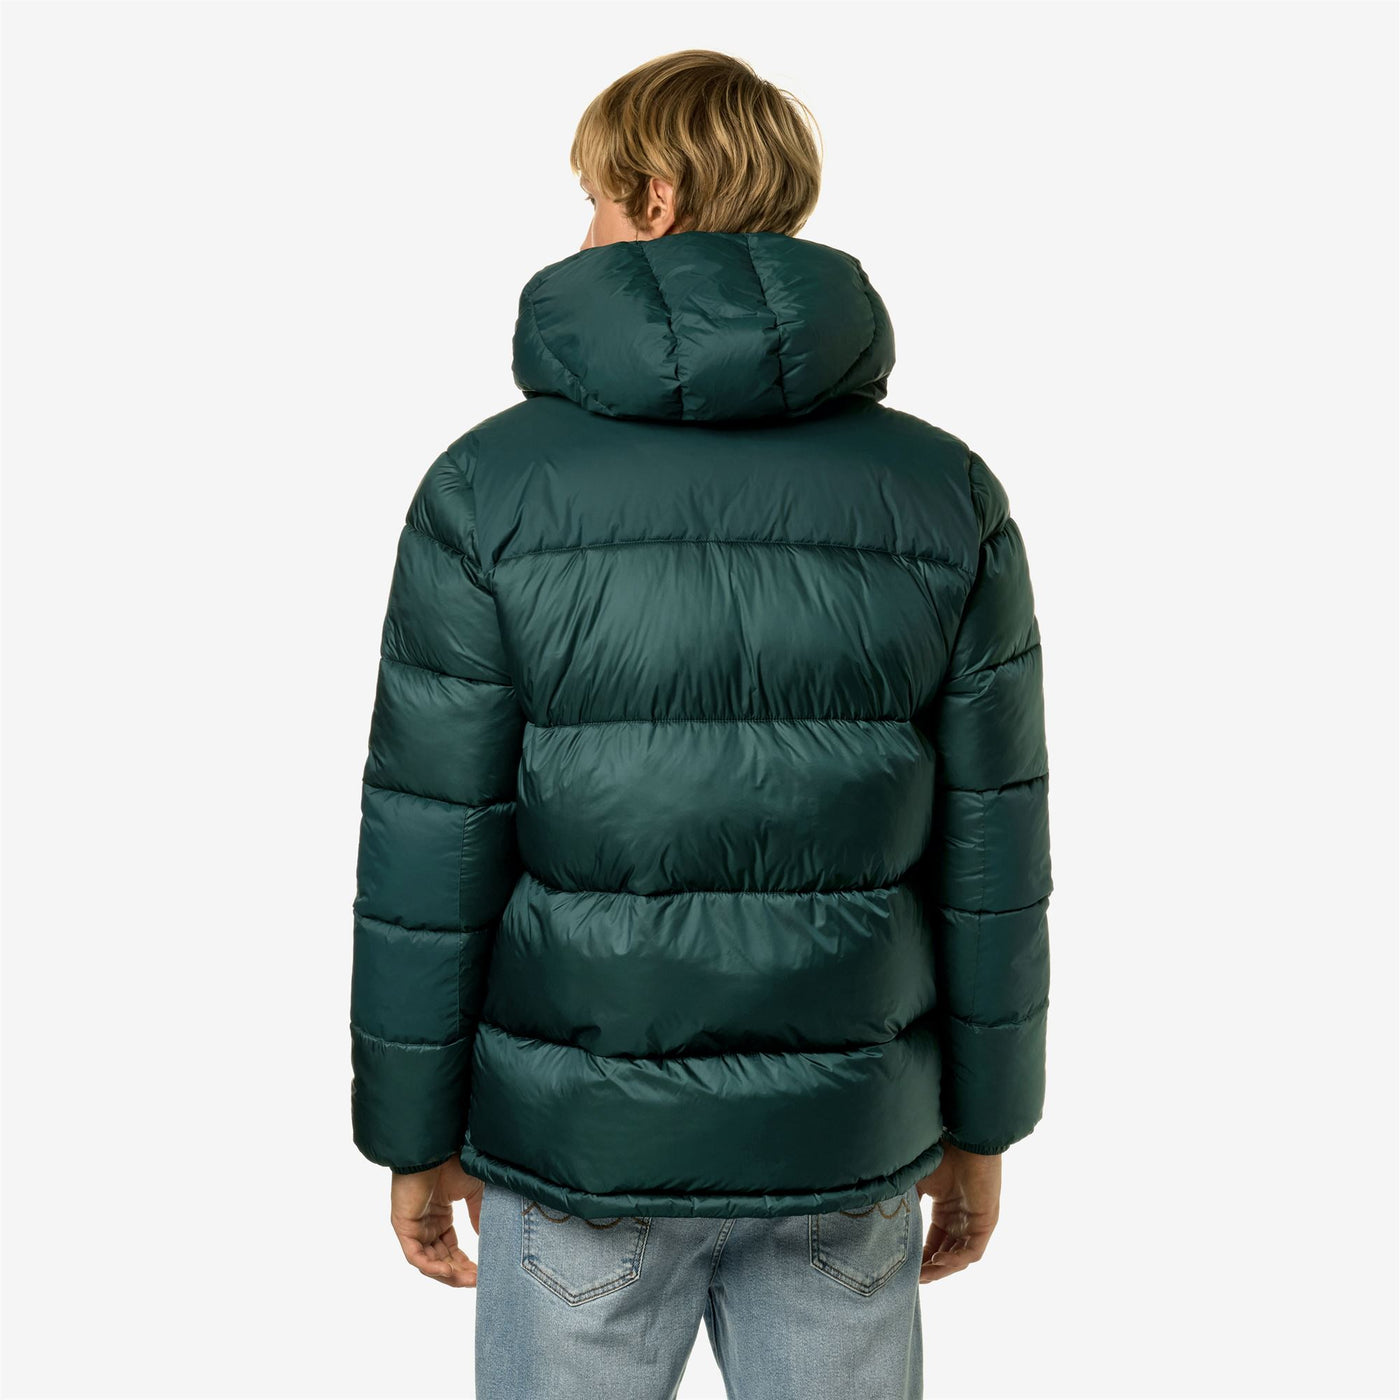 Jackets Unisex LE VRAI 3.0 CLAUDE HEAVY WARM Mid GREEN PETROL Dressed Front Double		